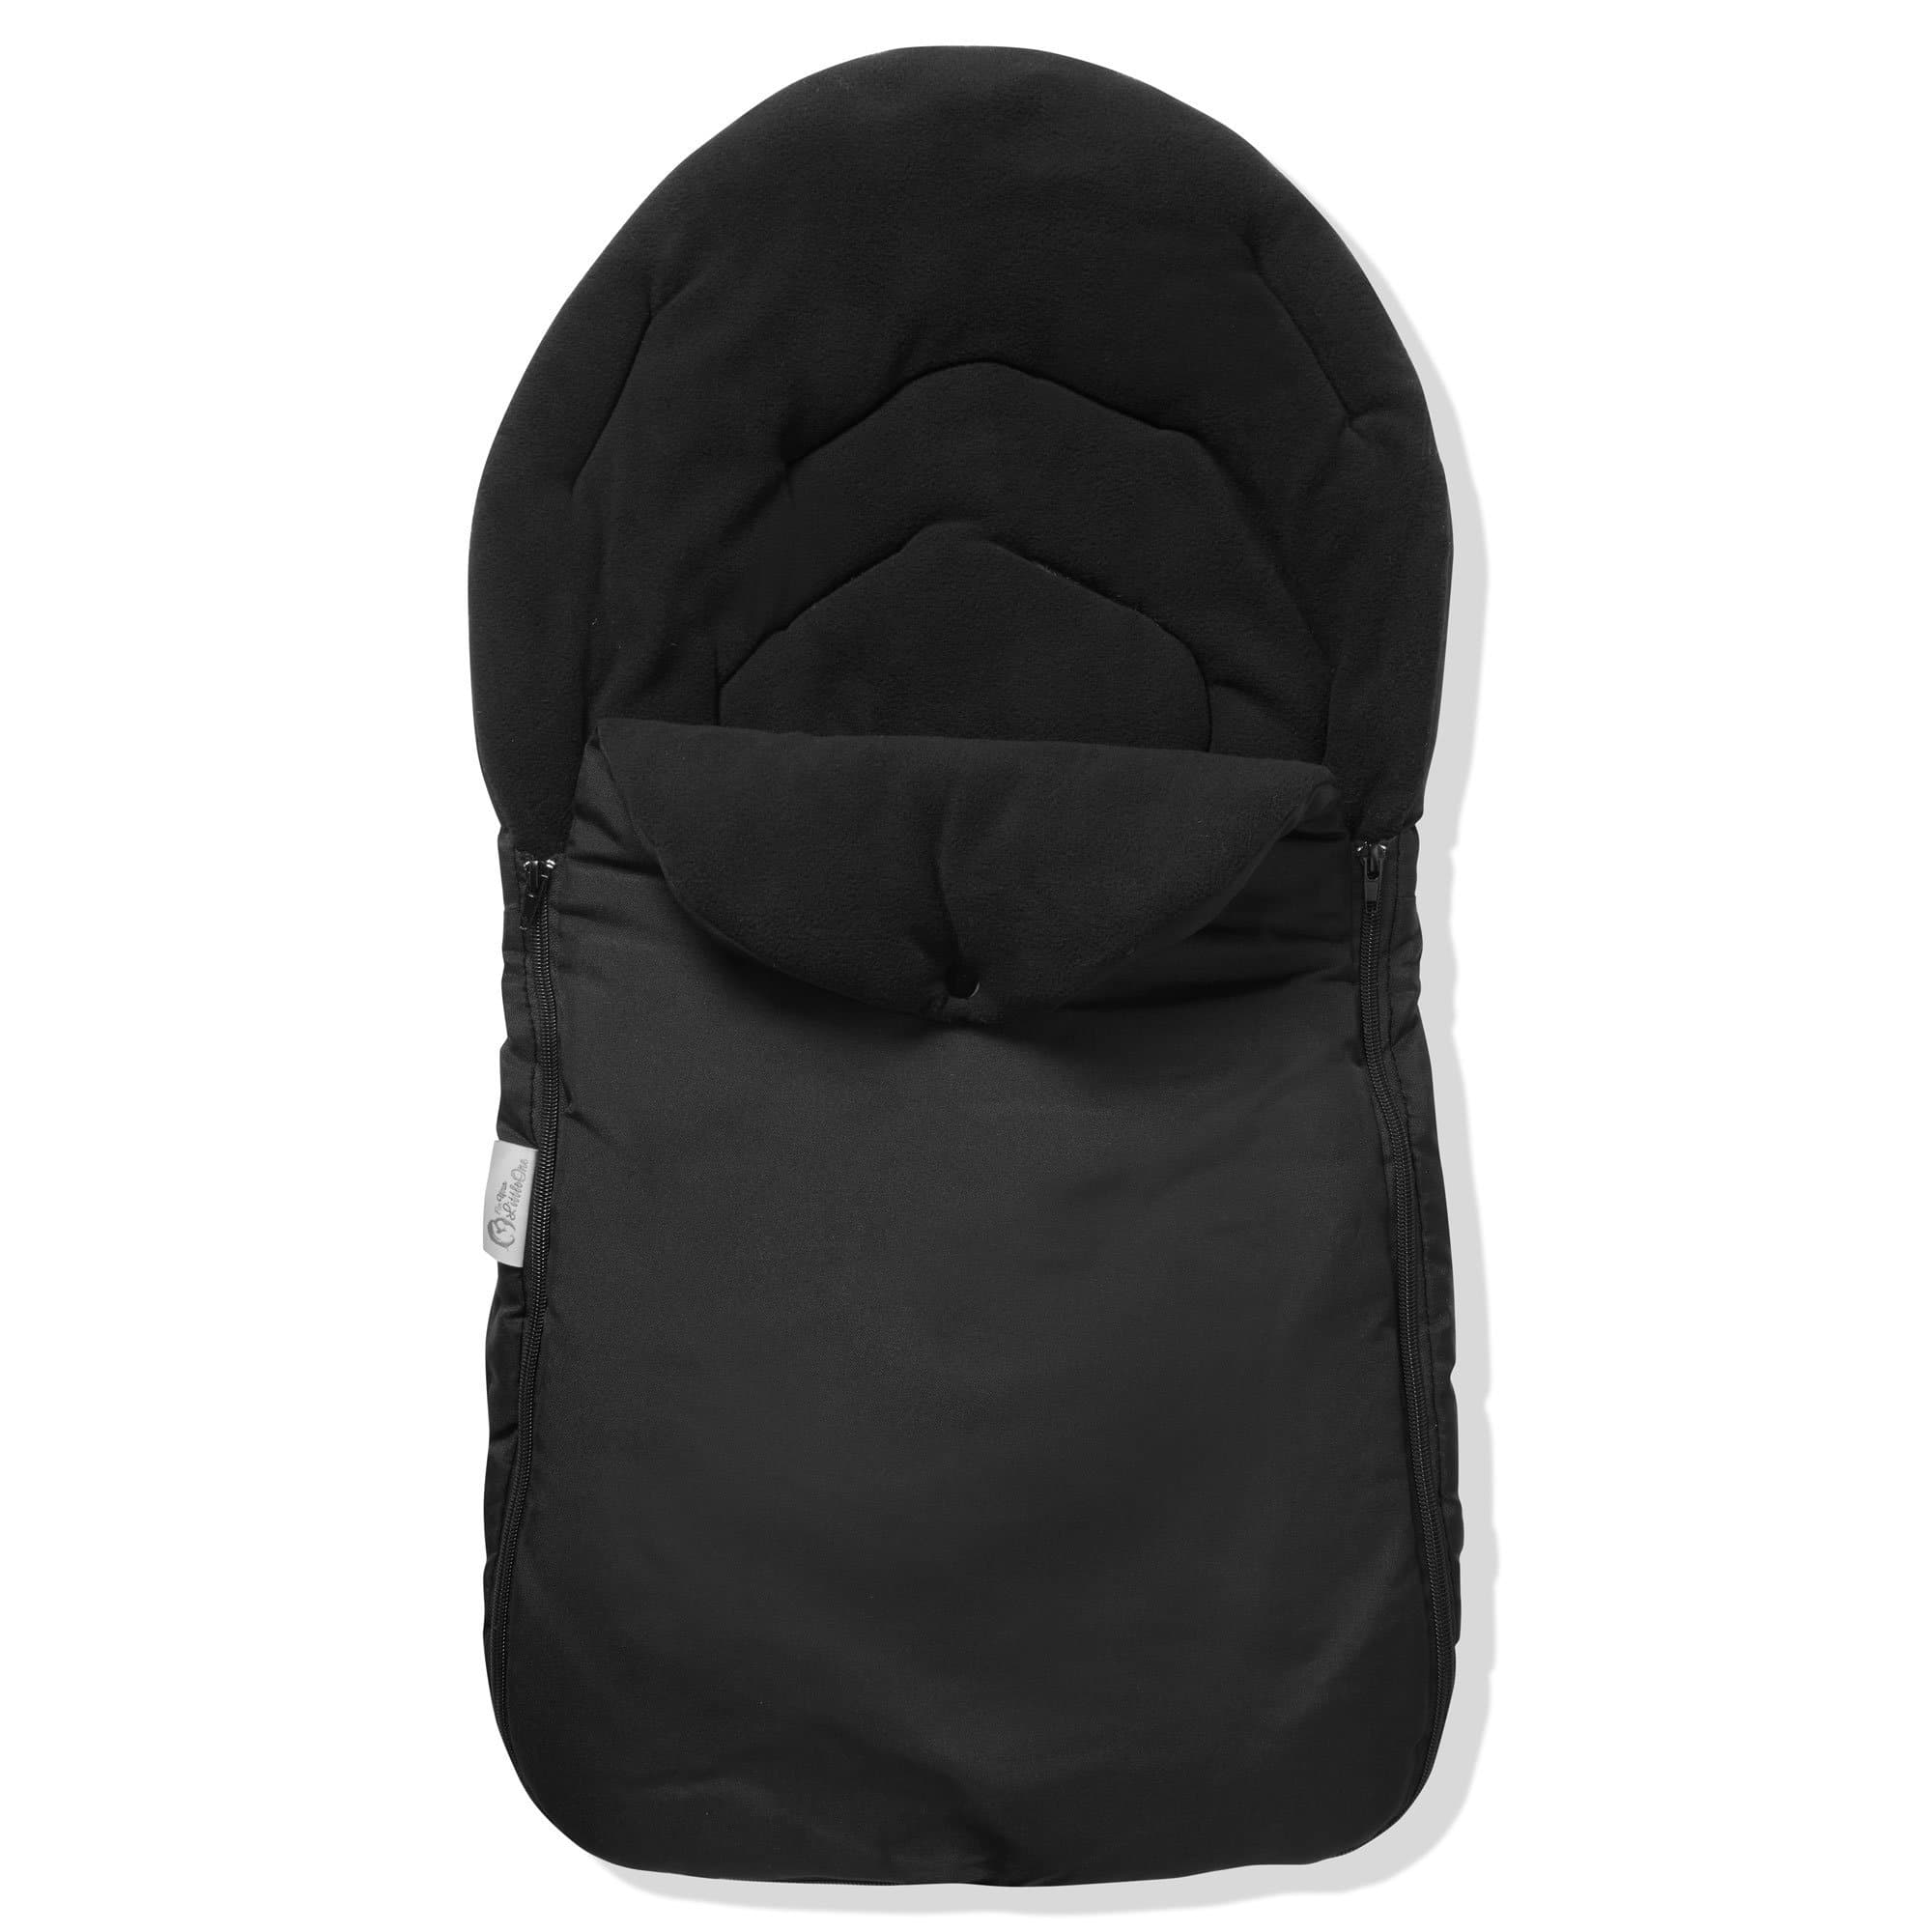 Car Seat Footmuff / Cosy Toes Compatible with Phil & Teds - Black / Fits All Models | For Your Little One